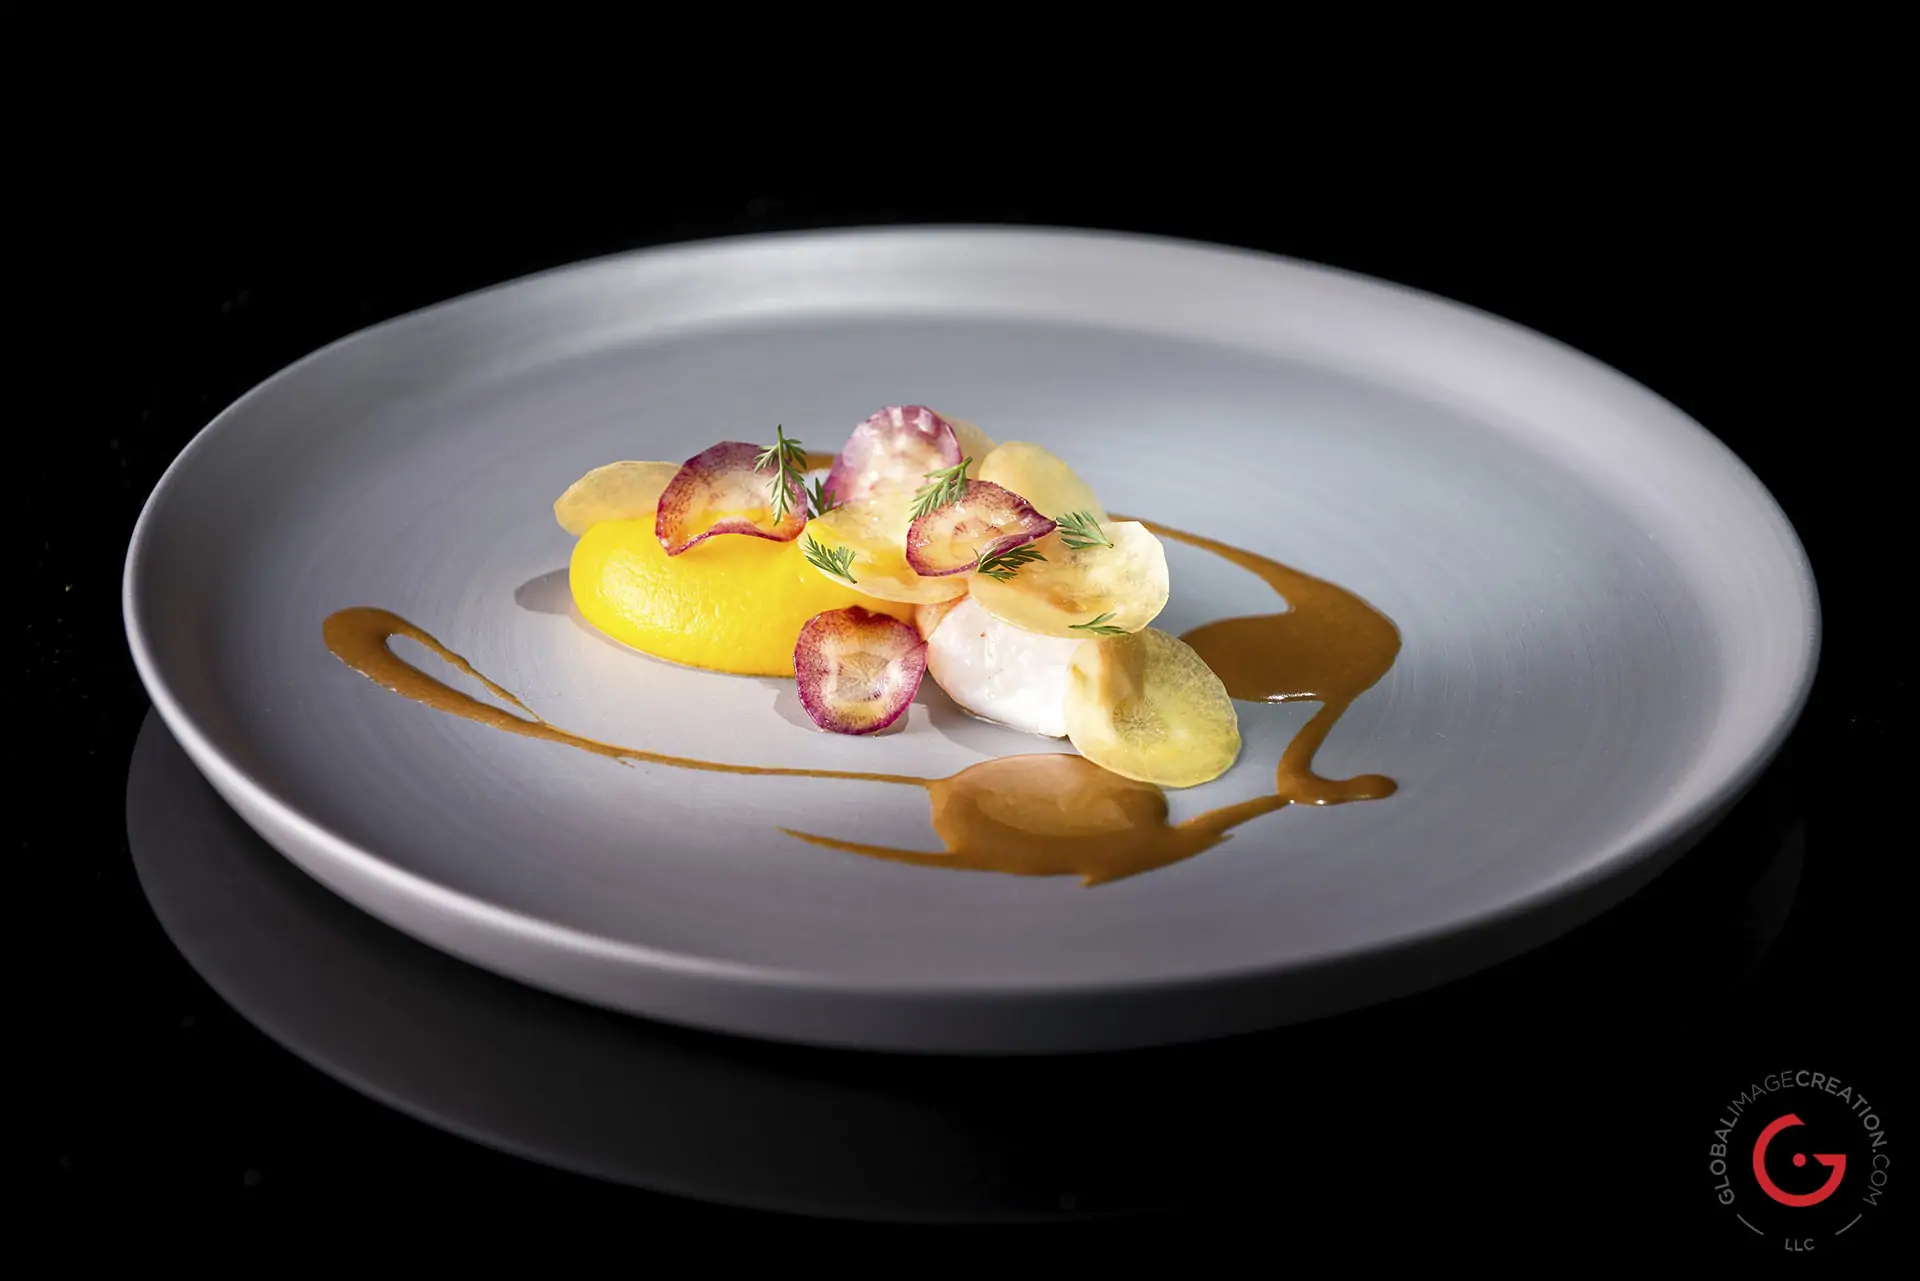 Food Photographer of Two Michelin Star Chef Sven Wassmer 7132 Silver - Best Chefs in The World - Professional Food Photography, Culinary Photographer, Restaurant Photos